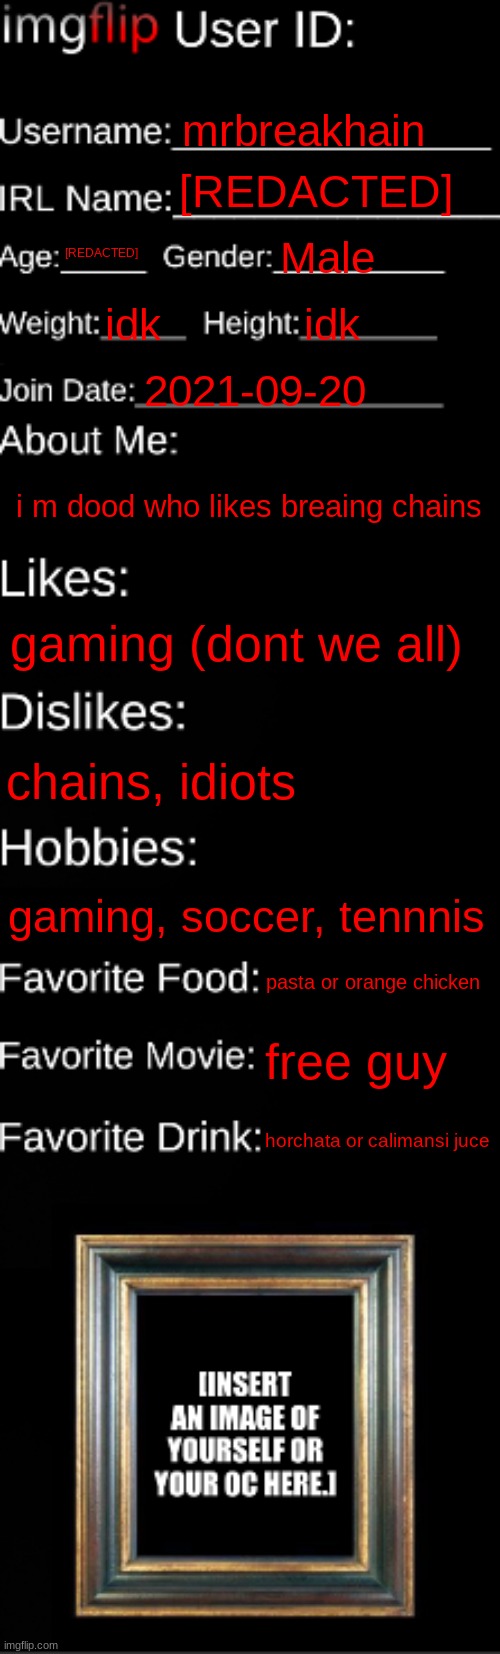 i dont want to reveal my age nor name for privacy | mrbreakhain; [REDACTED]; [REDACTED]; Male; idk; idk; 2021-09-20; i m dood who likes breaing chains; gaming (dont we all); chains, idiots; gaming, soccer, tennnis; pasta or orange chicken; free guy; horchata or calimansi juce | image tagged in imgflip id card | made w/ Imgflip meme maker